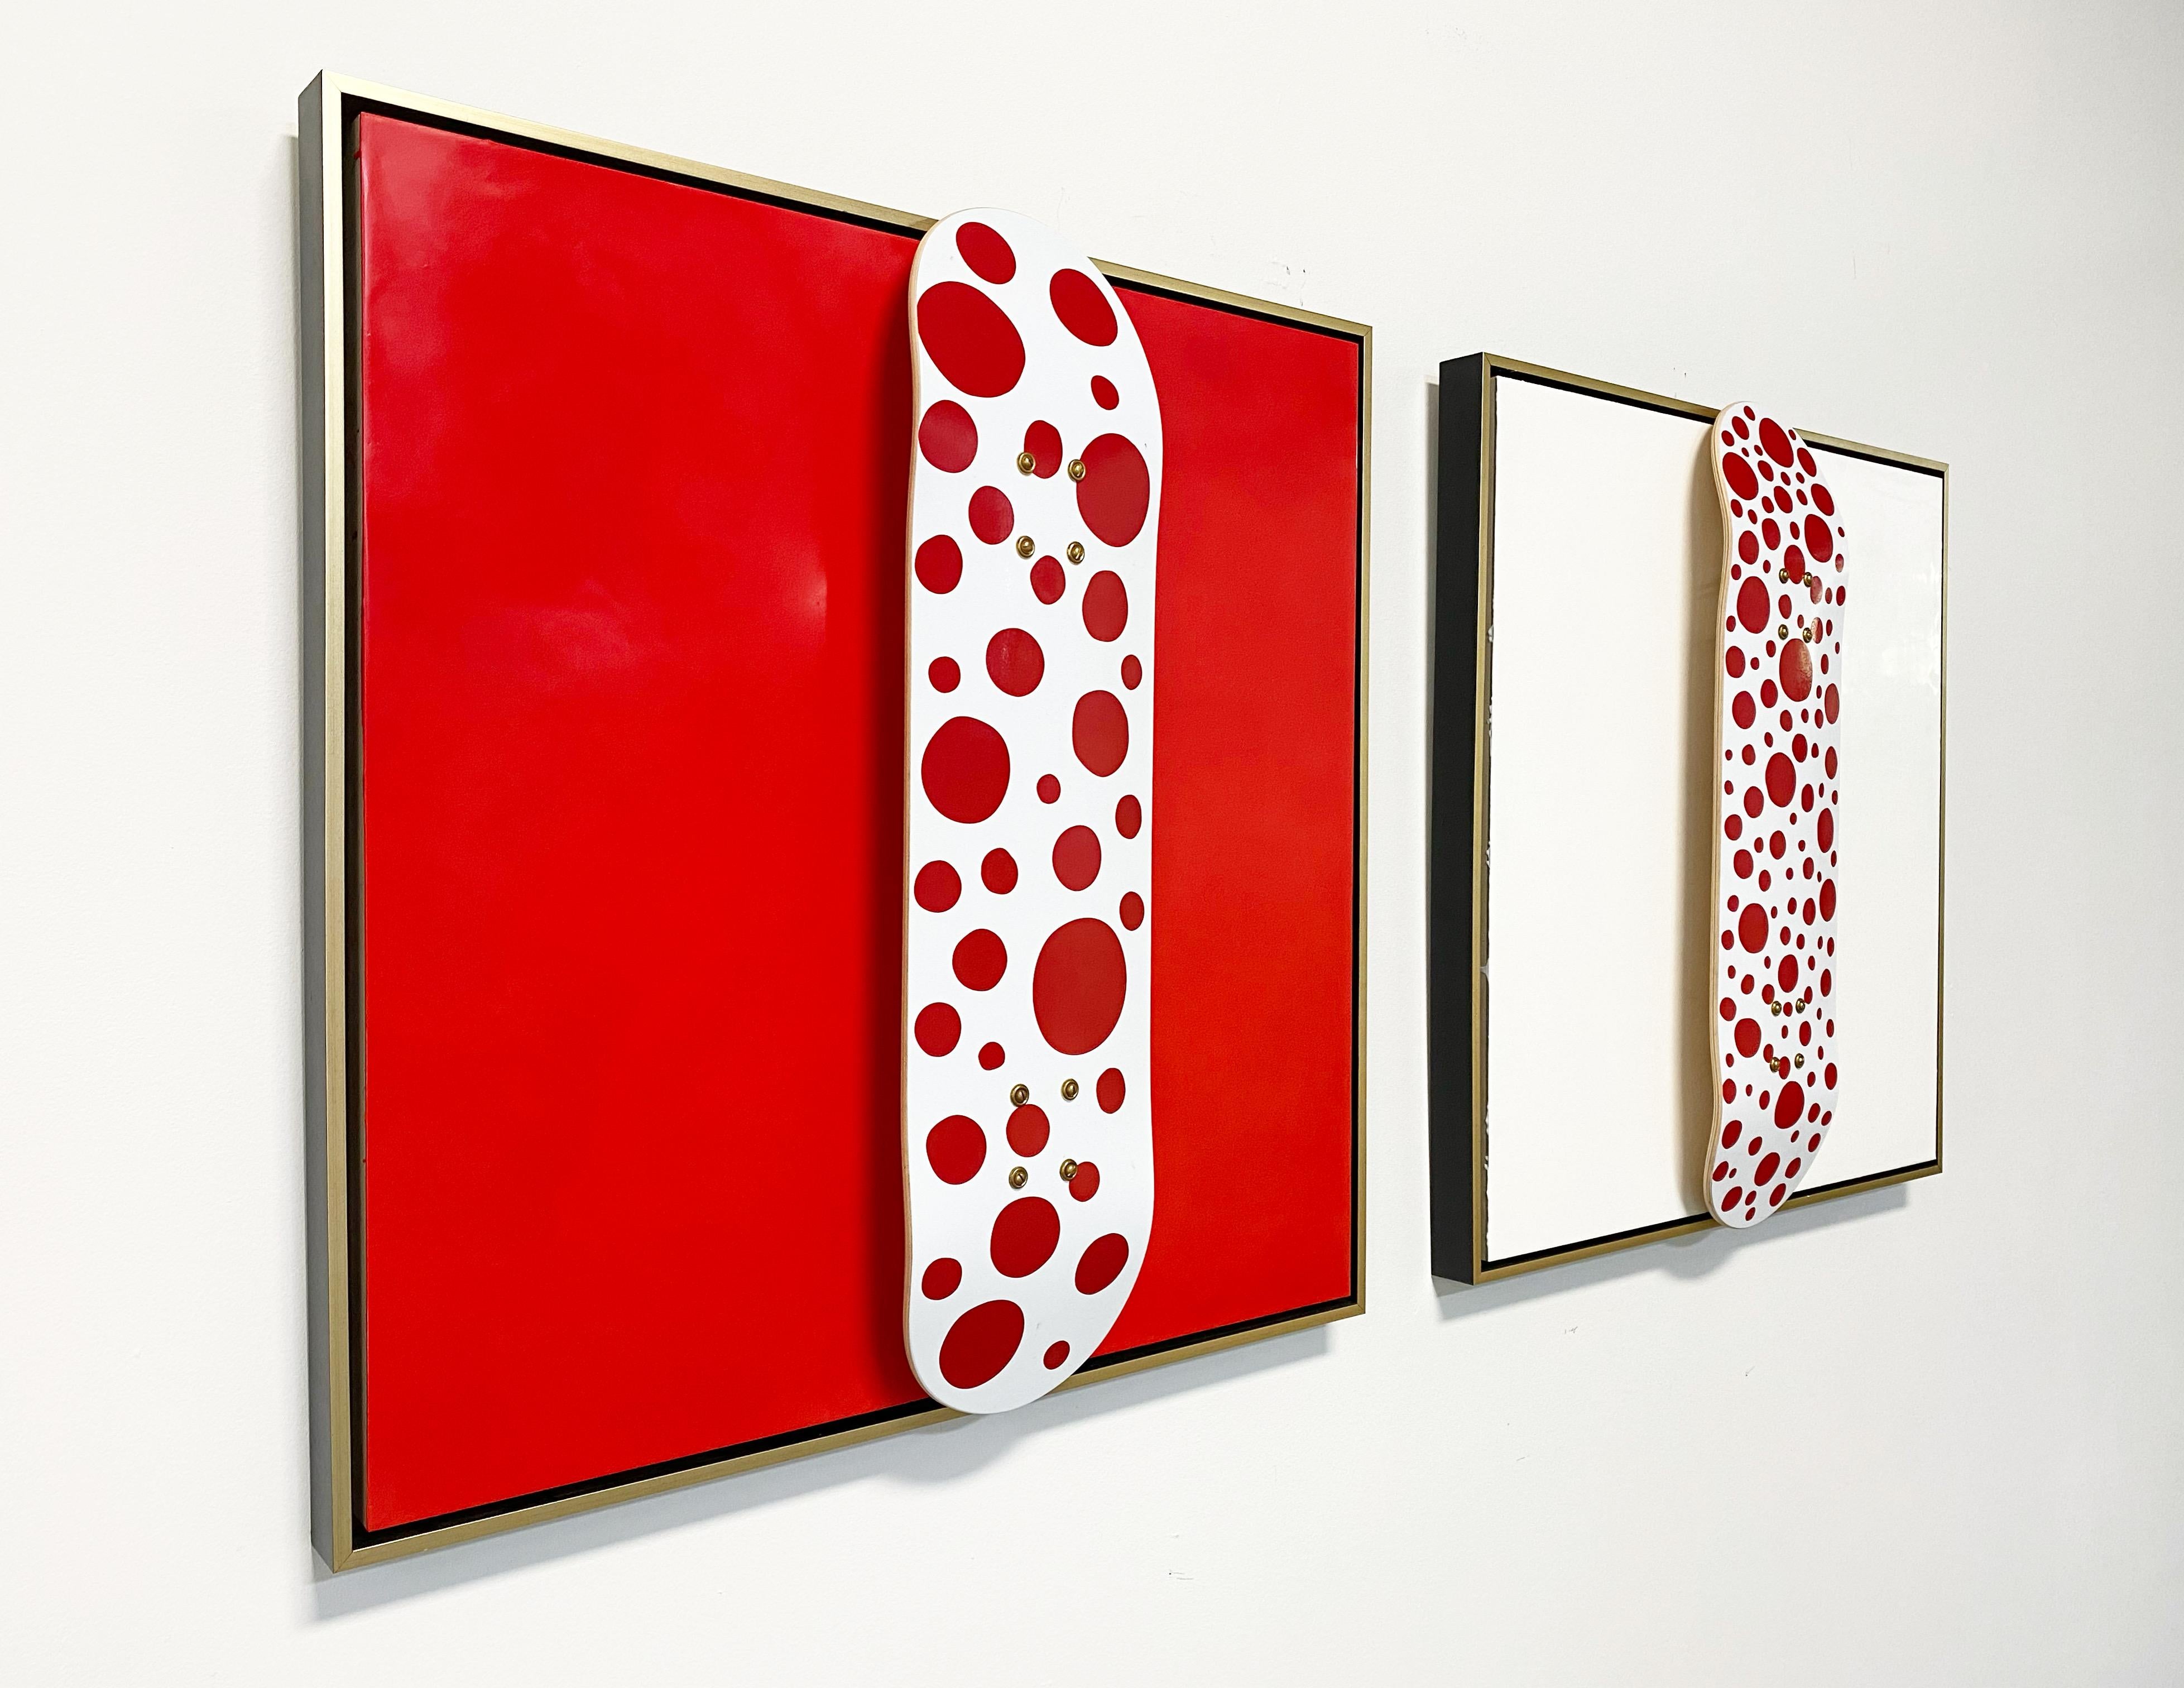 The Deck series. Screen-printed maple skate deck float-mounted on encaustic painted board.These Canadian maple wood skateboards feature DOTS OBSESSION (2018), by Yayoi Kusama.

Art dimensions: 30 x 30 H inches each
Framed dimensions: 31.5 W x